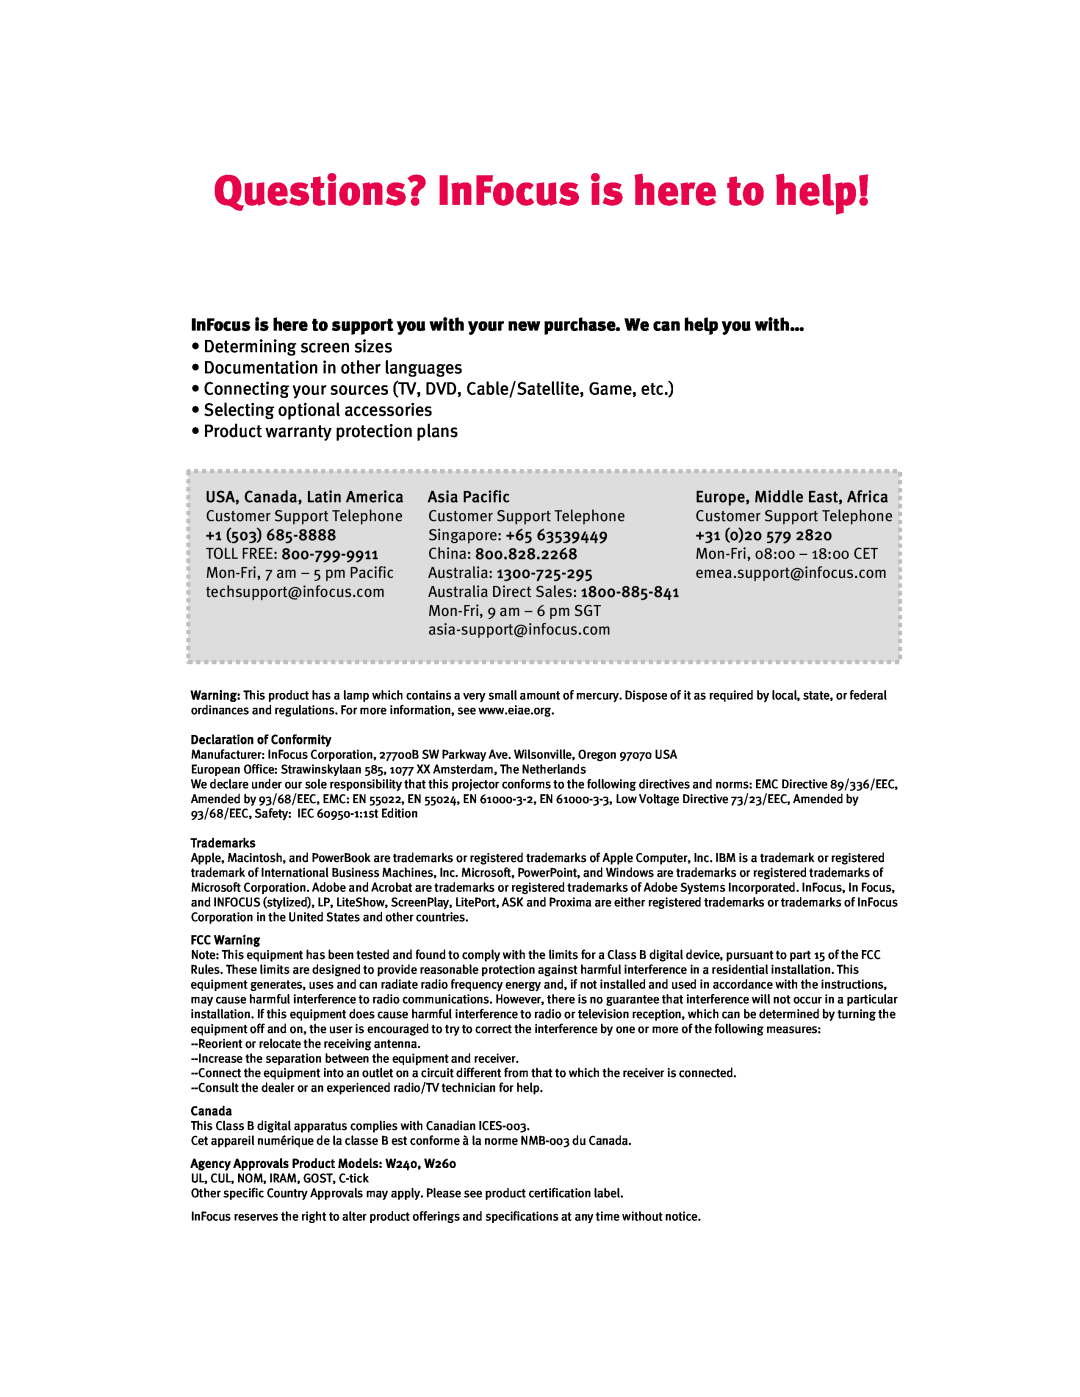 InFocus IN20 Series Questions? InFocus is here to help, USA, Canada, Latin America, Asia Pacific, +1 503, Singapore +65 